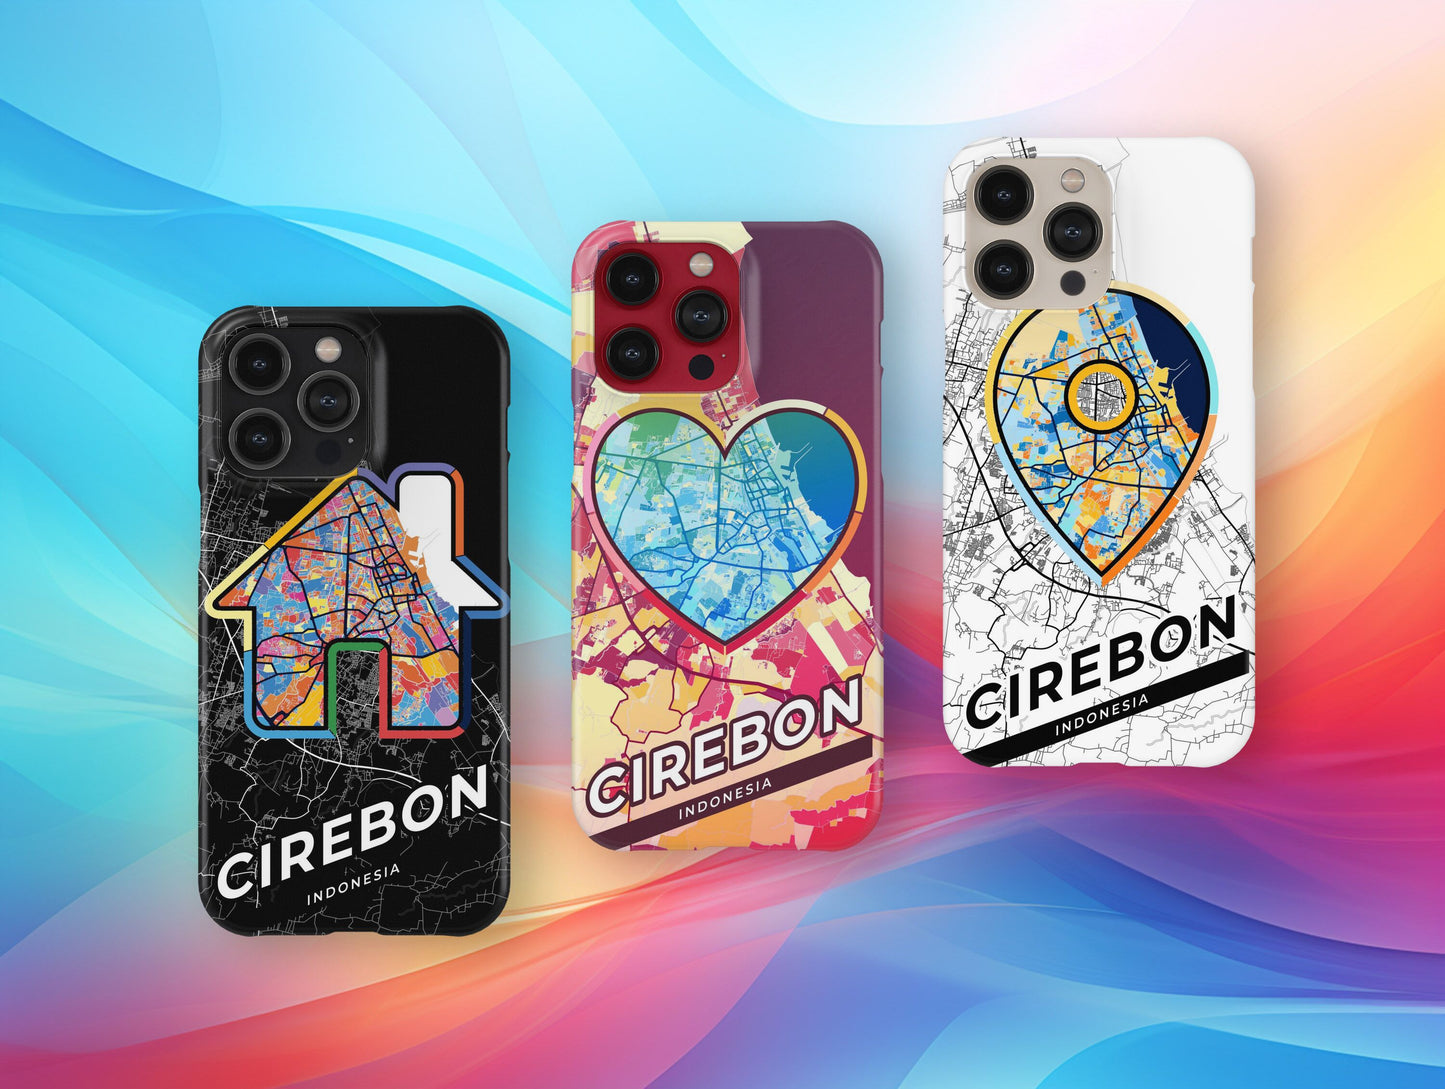 Cirebon Indonesia slim phone case with colorful icon. Birthday, wedding or housewarming gift. Couple match cases.